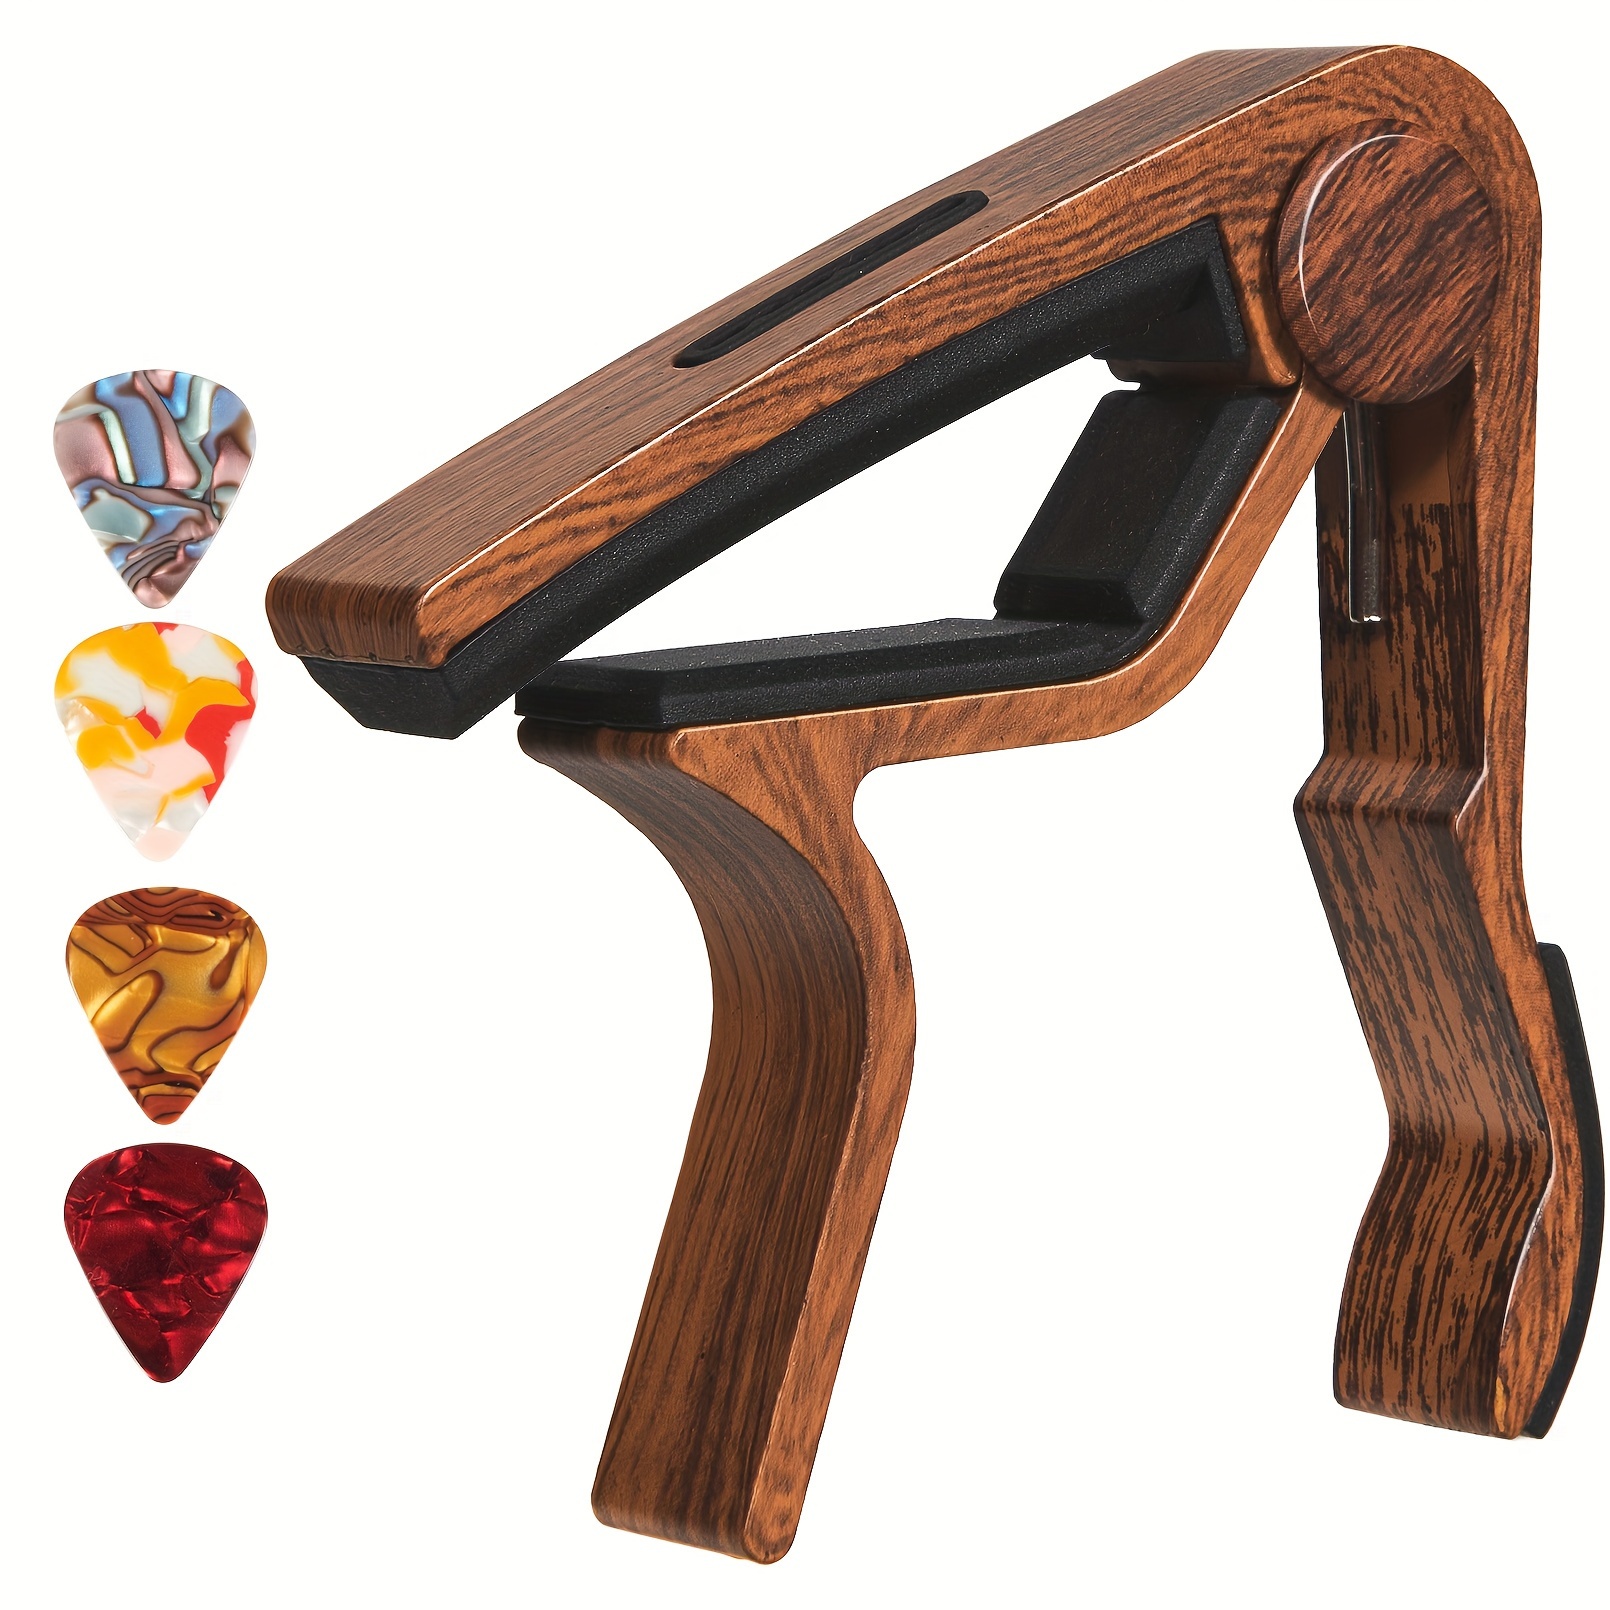 

Capo Guitar Capo With Pick Holder For Acoustic And Electric Guitar, Ukelele, Bass, Banjo With Guitar Picks